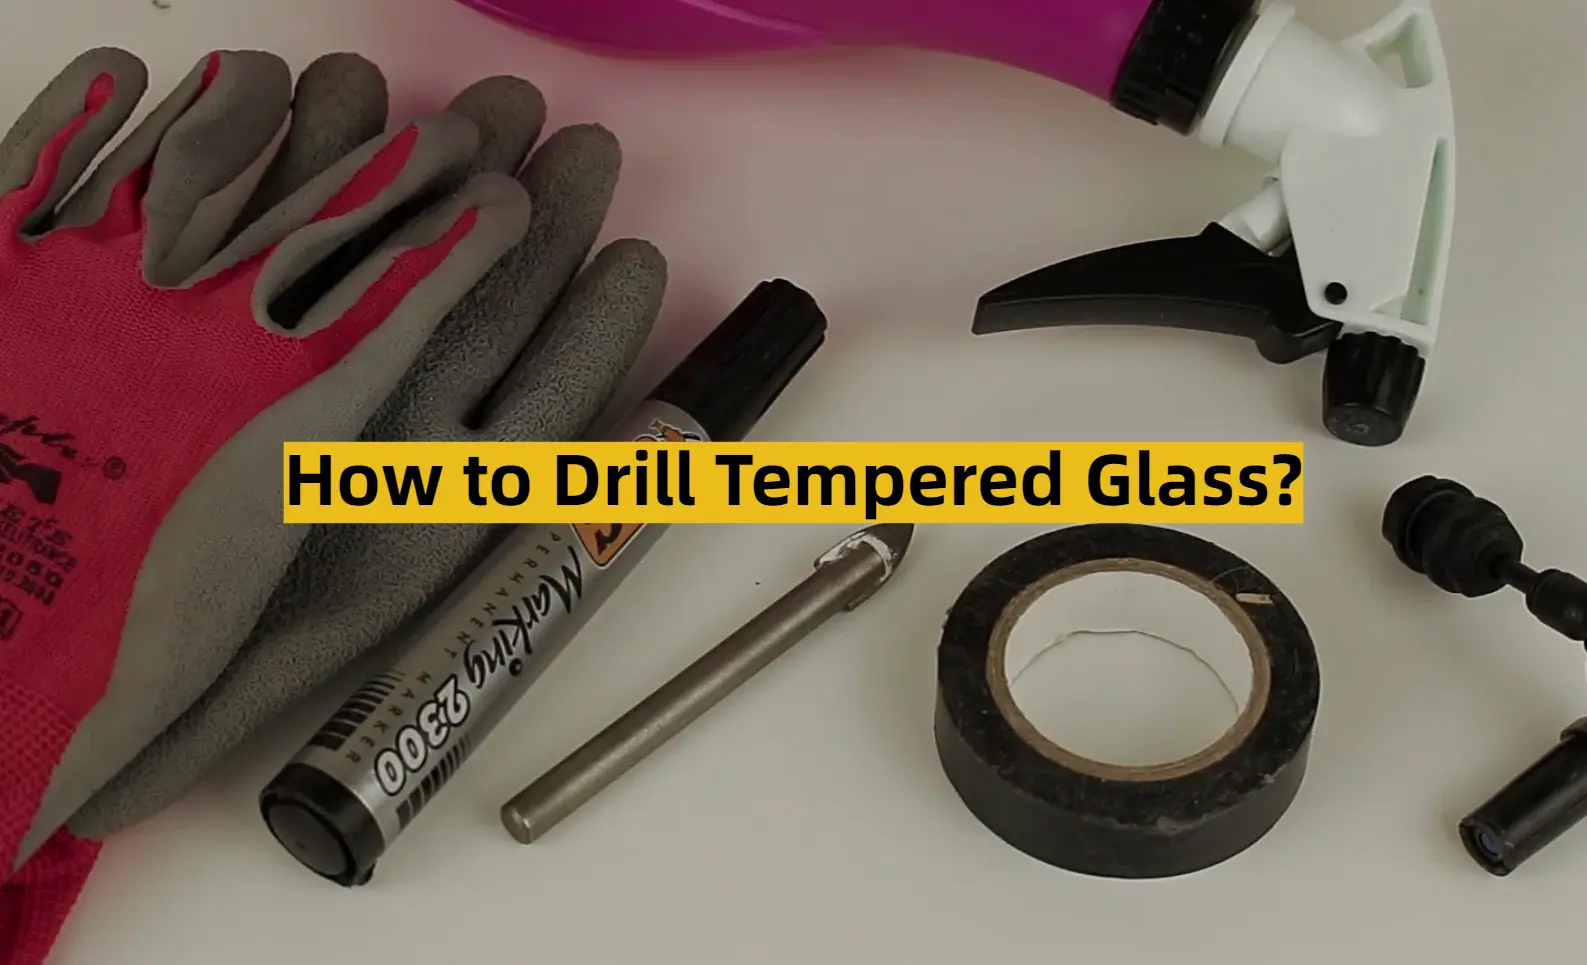 How to Drill Tempered Glass?